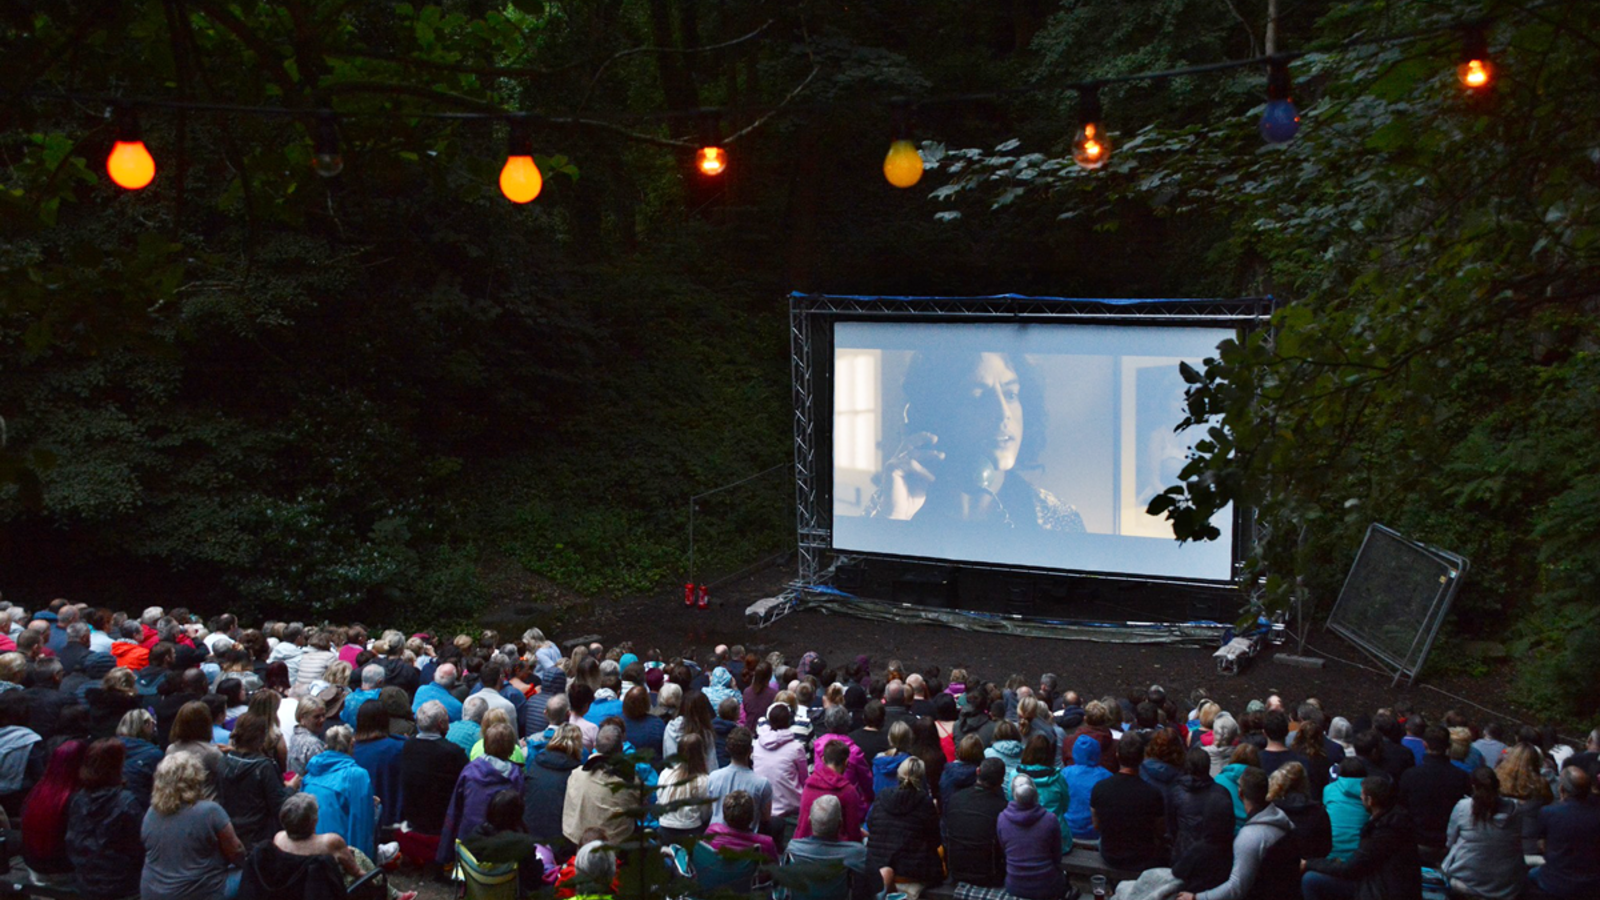 A group of people watching a film at an outdoor cinema surrounded by trees